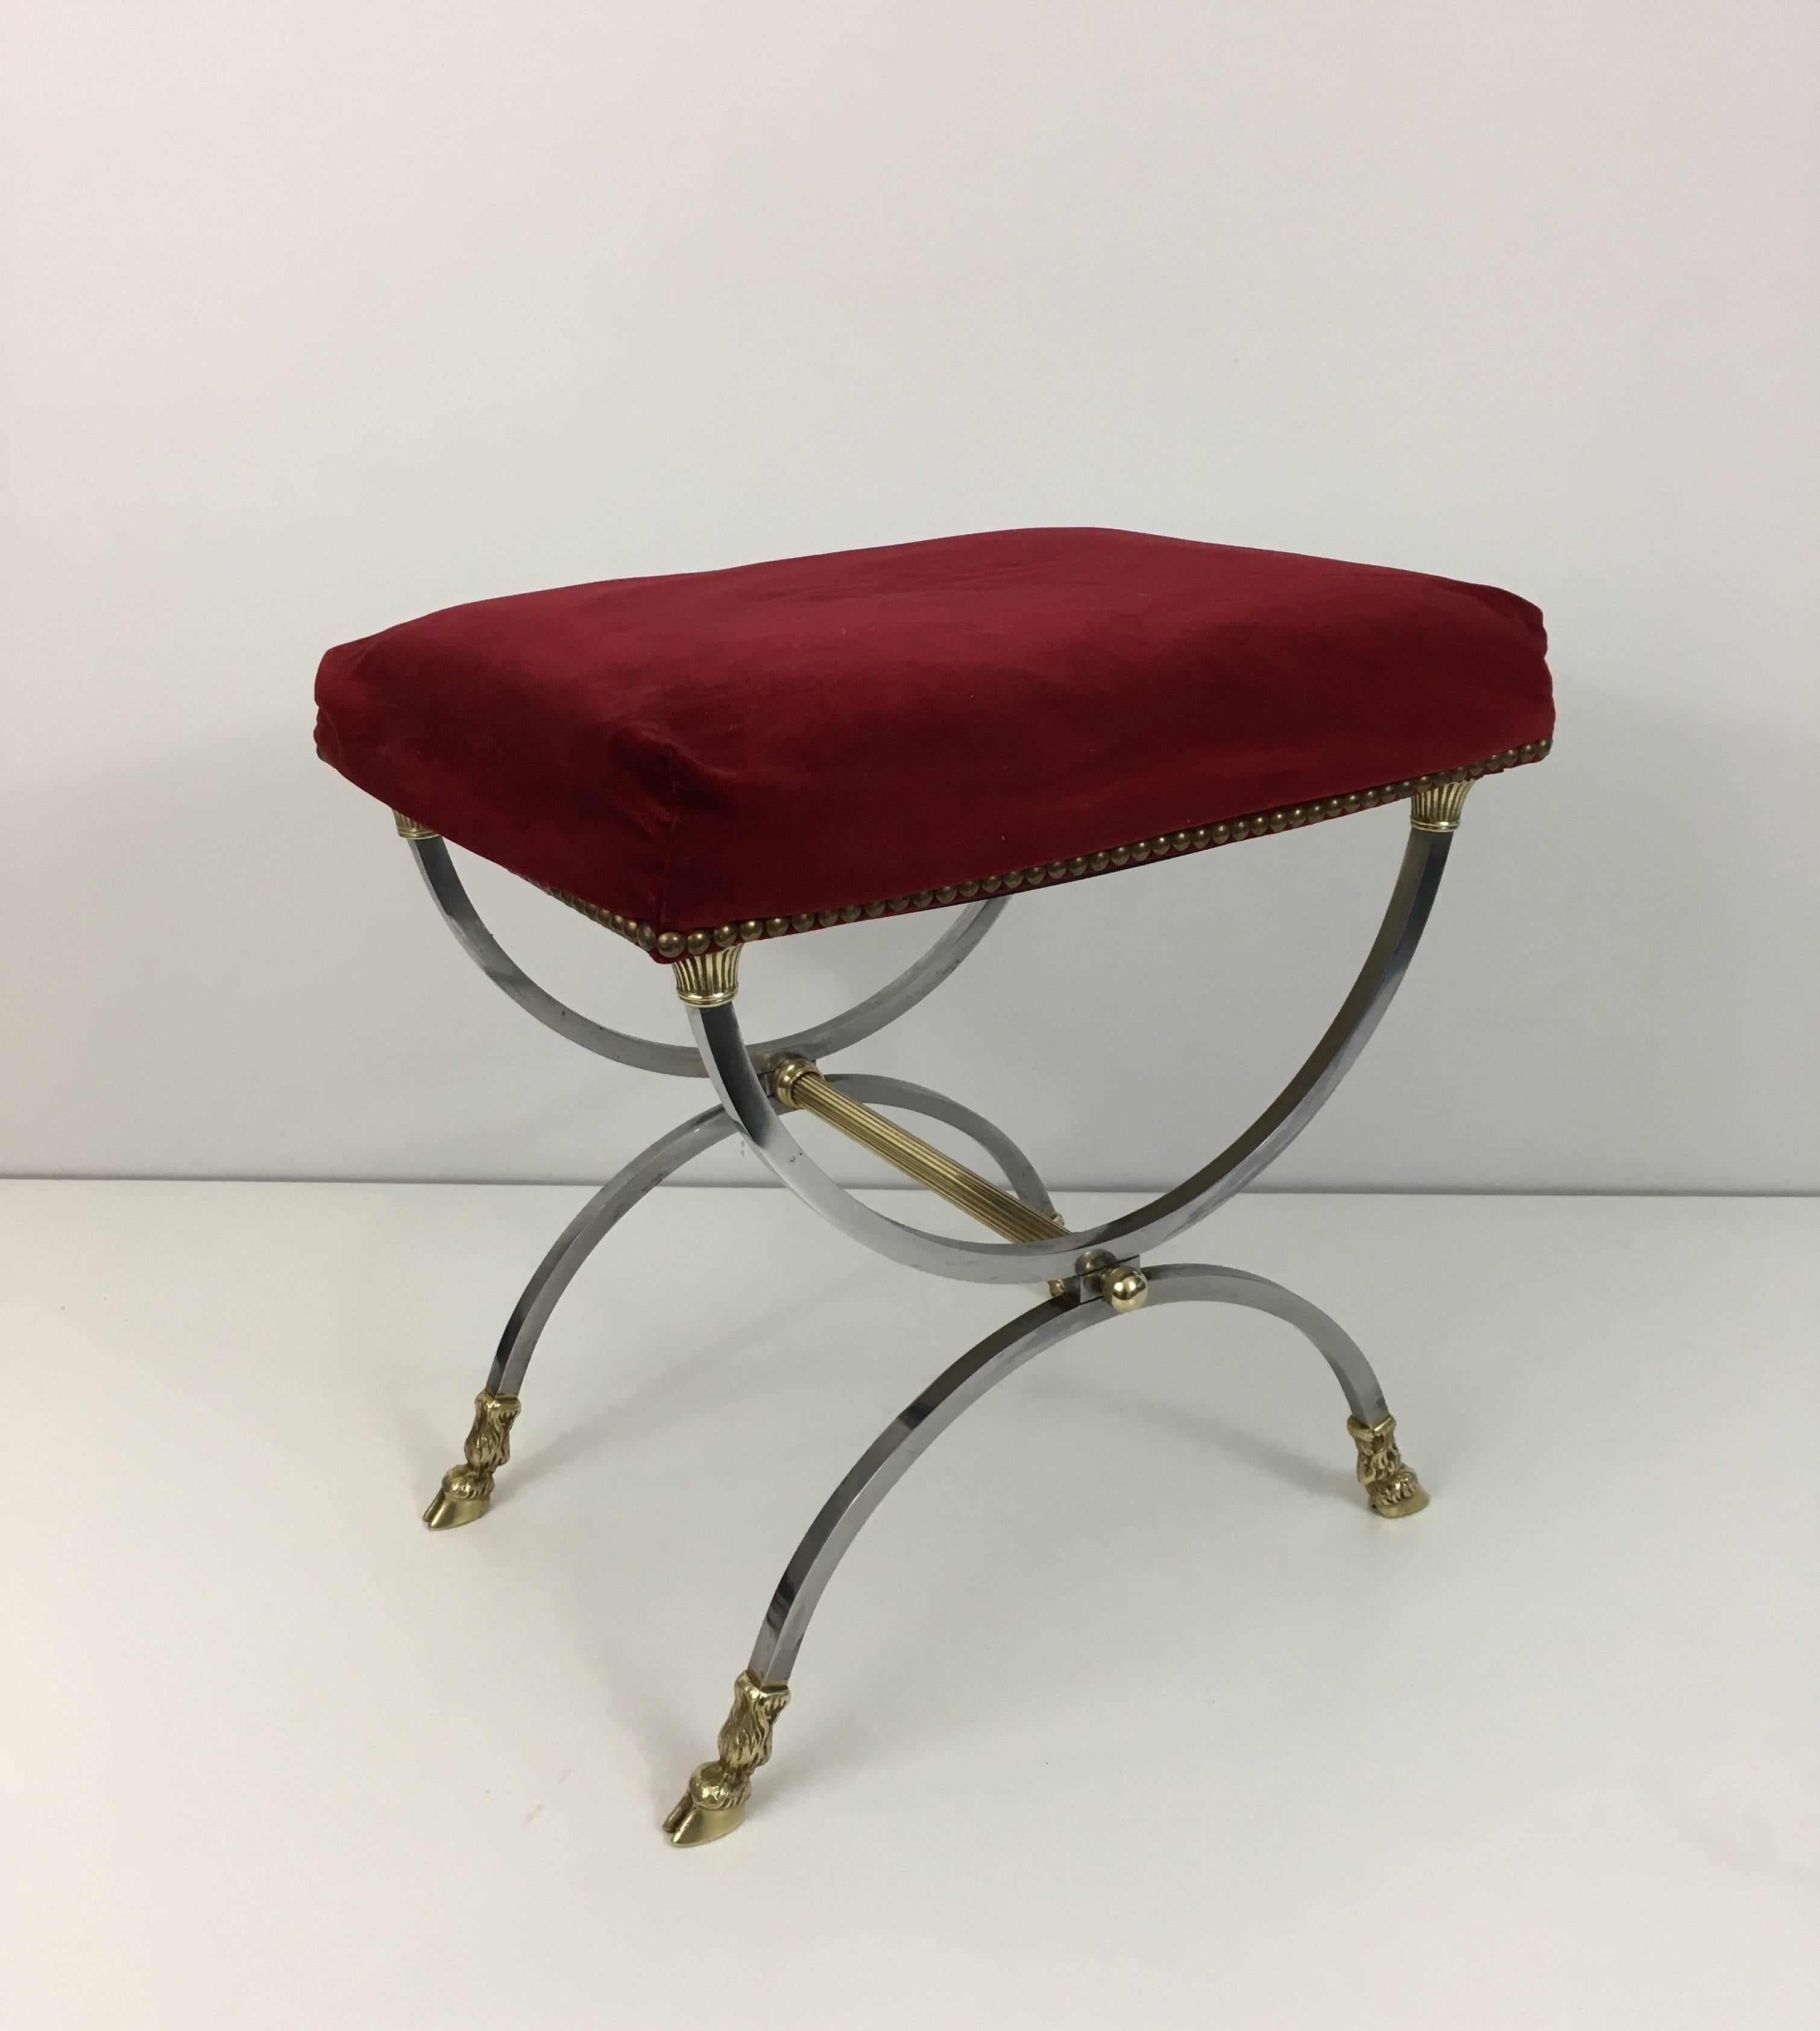 An elegant neoclassical style stool made in brushed steel with a red velvet upholstered seat. The base is comprised of brass hoofed feet and brass fluted stretcher. The seat is resting on bronze capital decorations. French 1940s by Maison